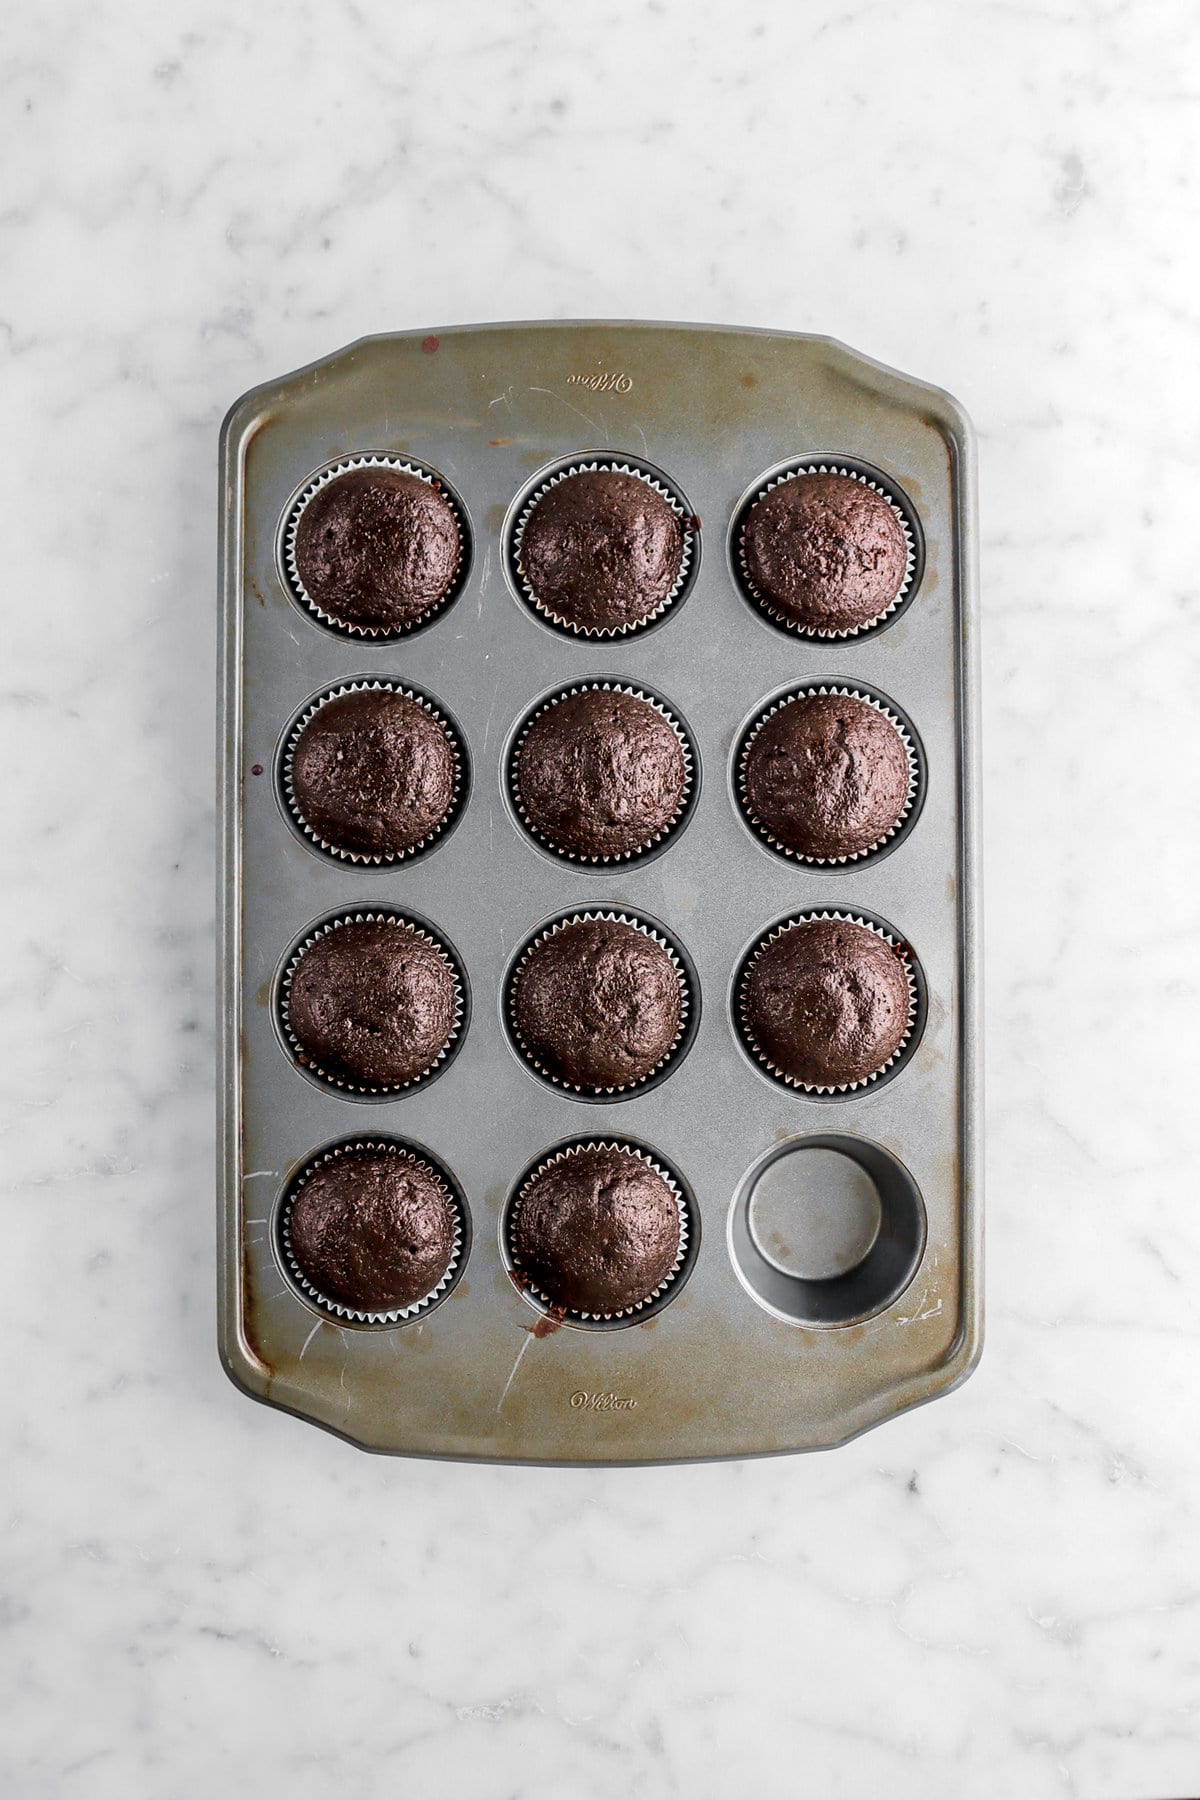 11 baked chocolate cupcakes in muffin pan.